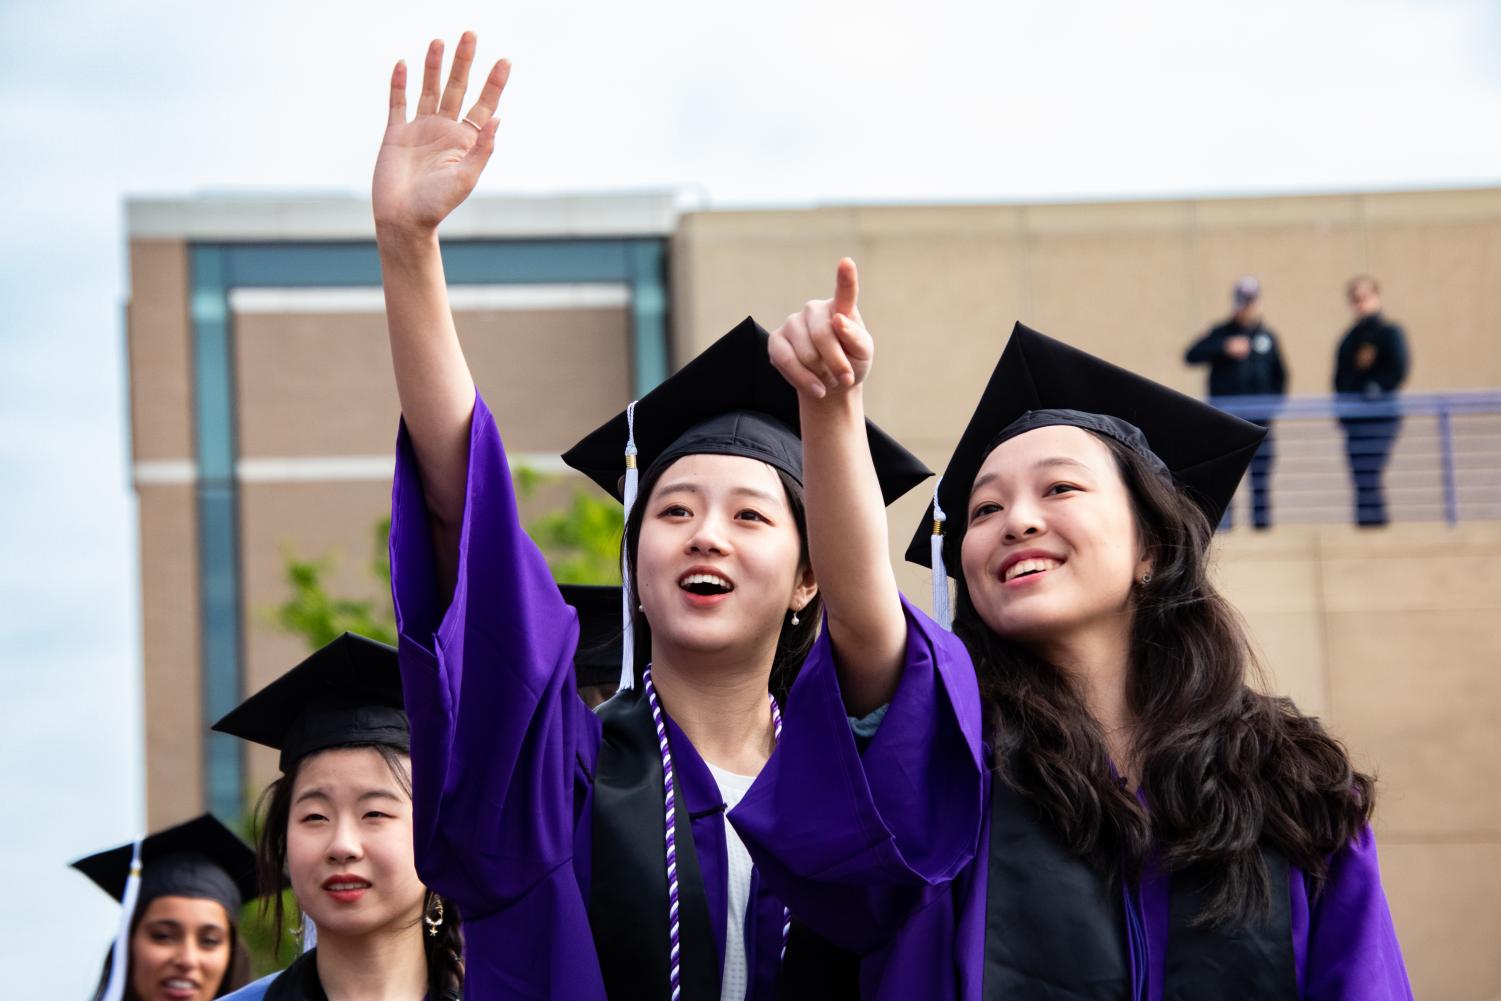 Two students in purple gowns and black caps point and wave to the crowd.